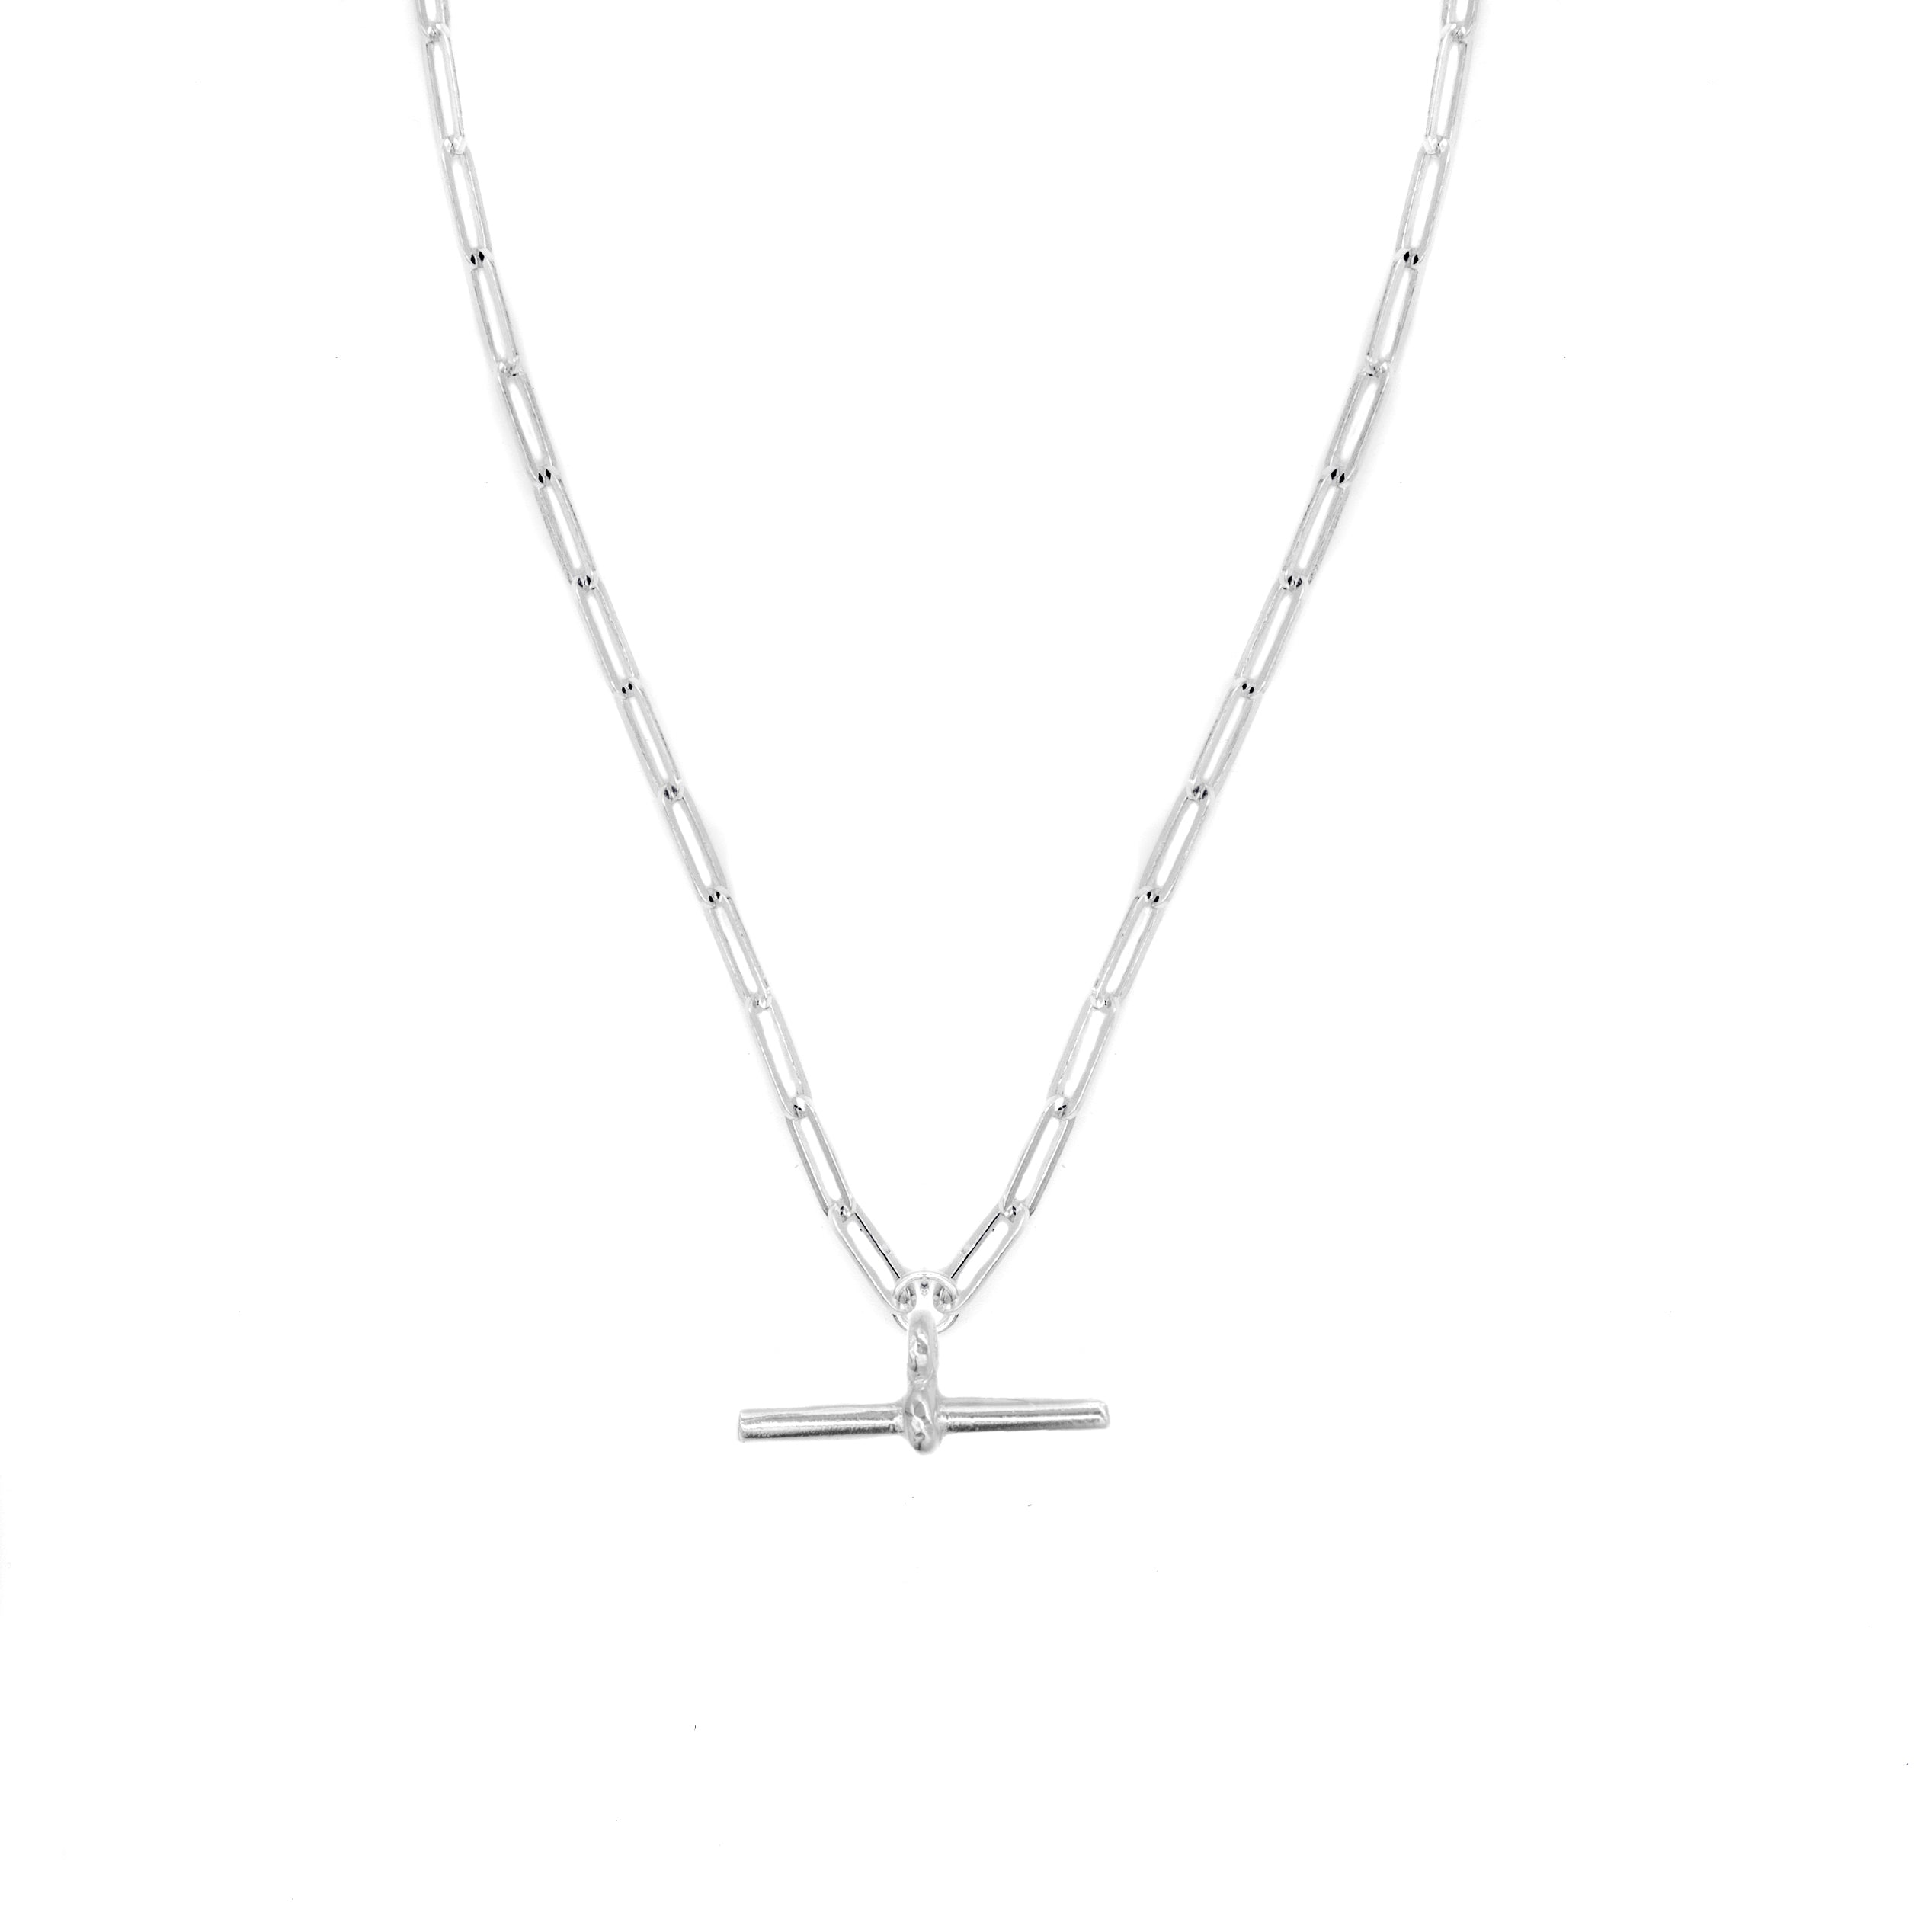 Belle & Bee Sterling Silver T Bar trace chain necklace